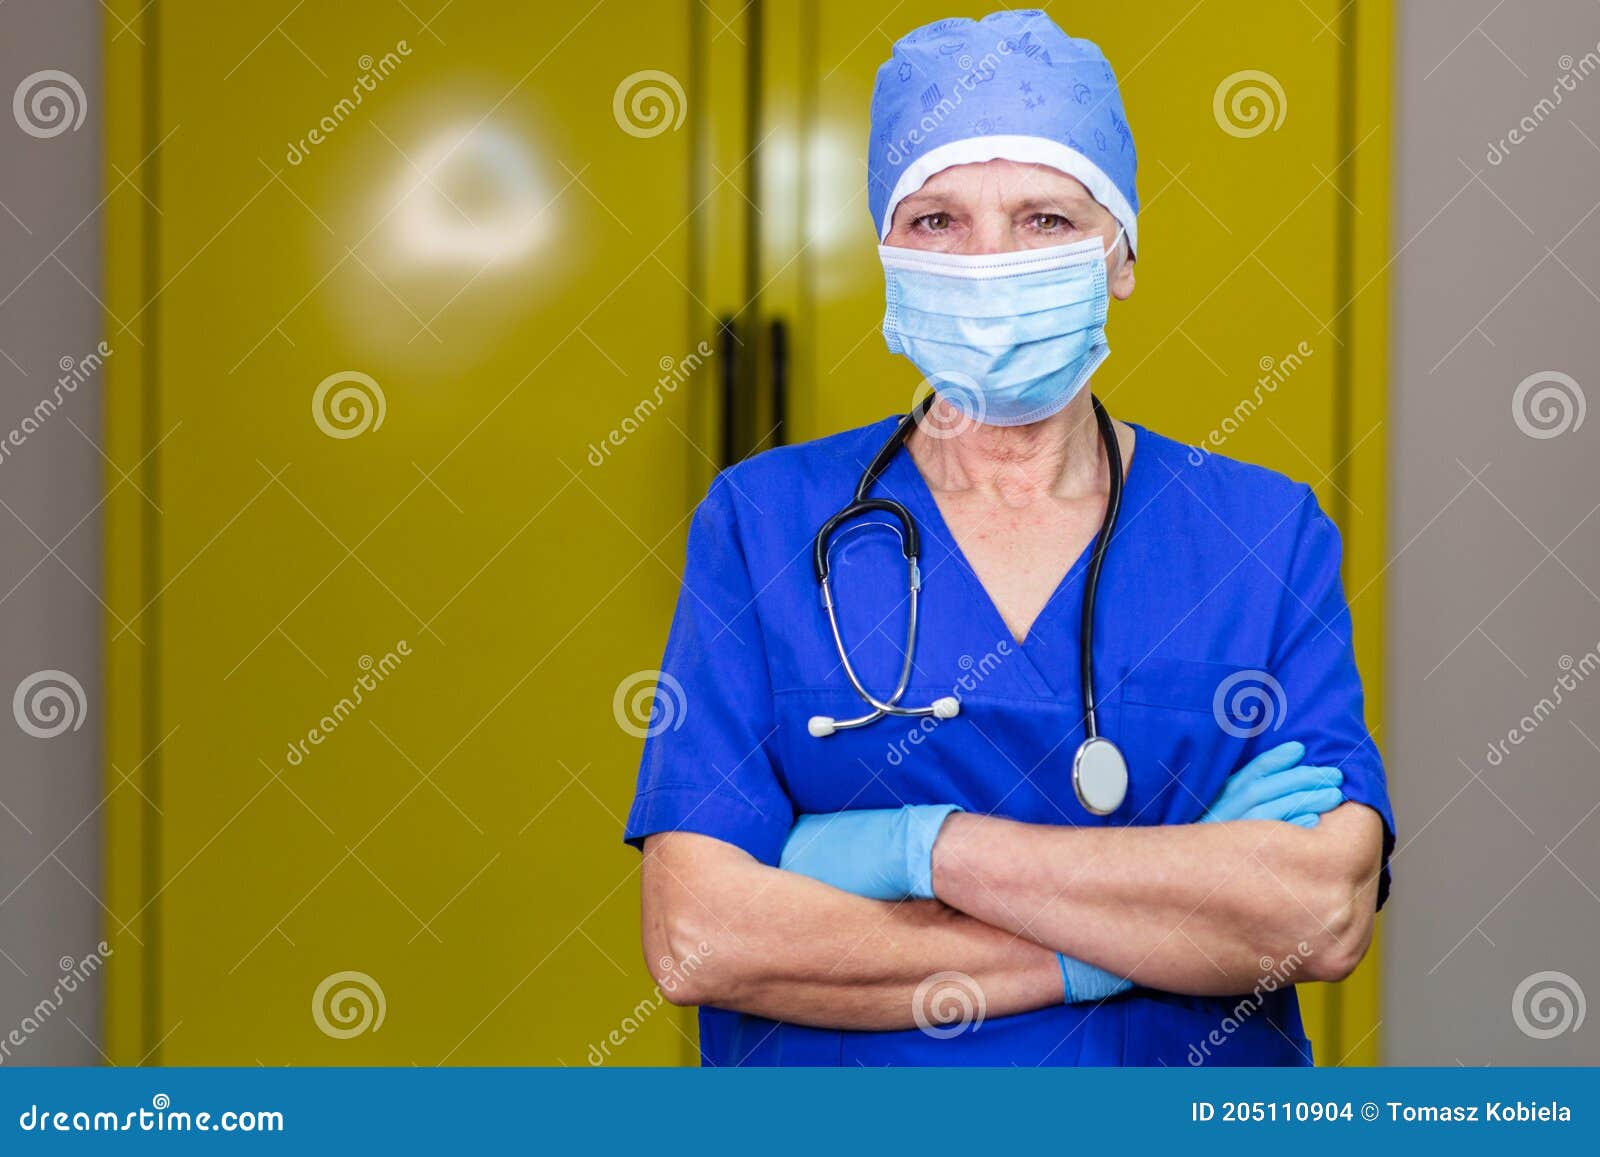 a doctor in surgical cap and stethoscope wearing nitrile gloves and a mask